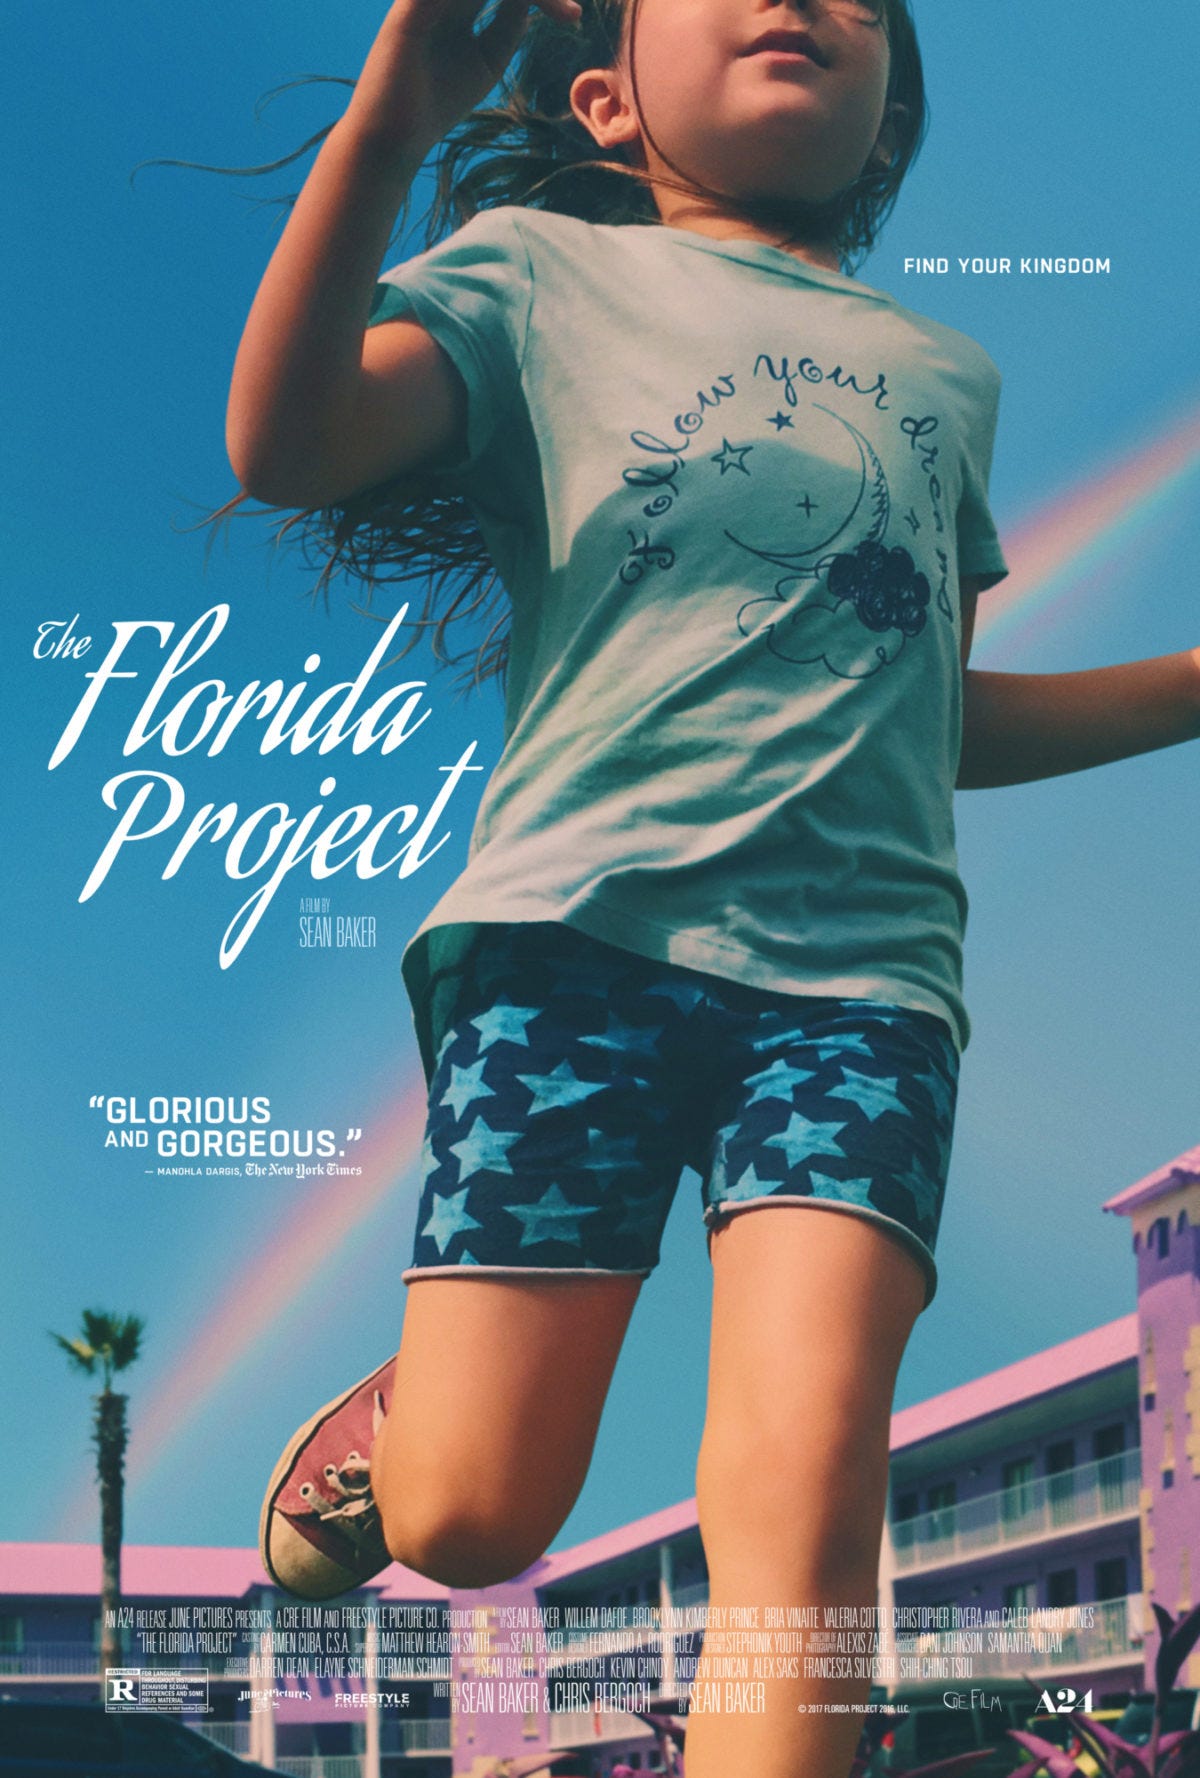 The Florida Project” casts a spell on an unmagical reality | by Sofia R |  Medium